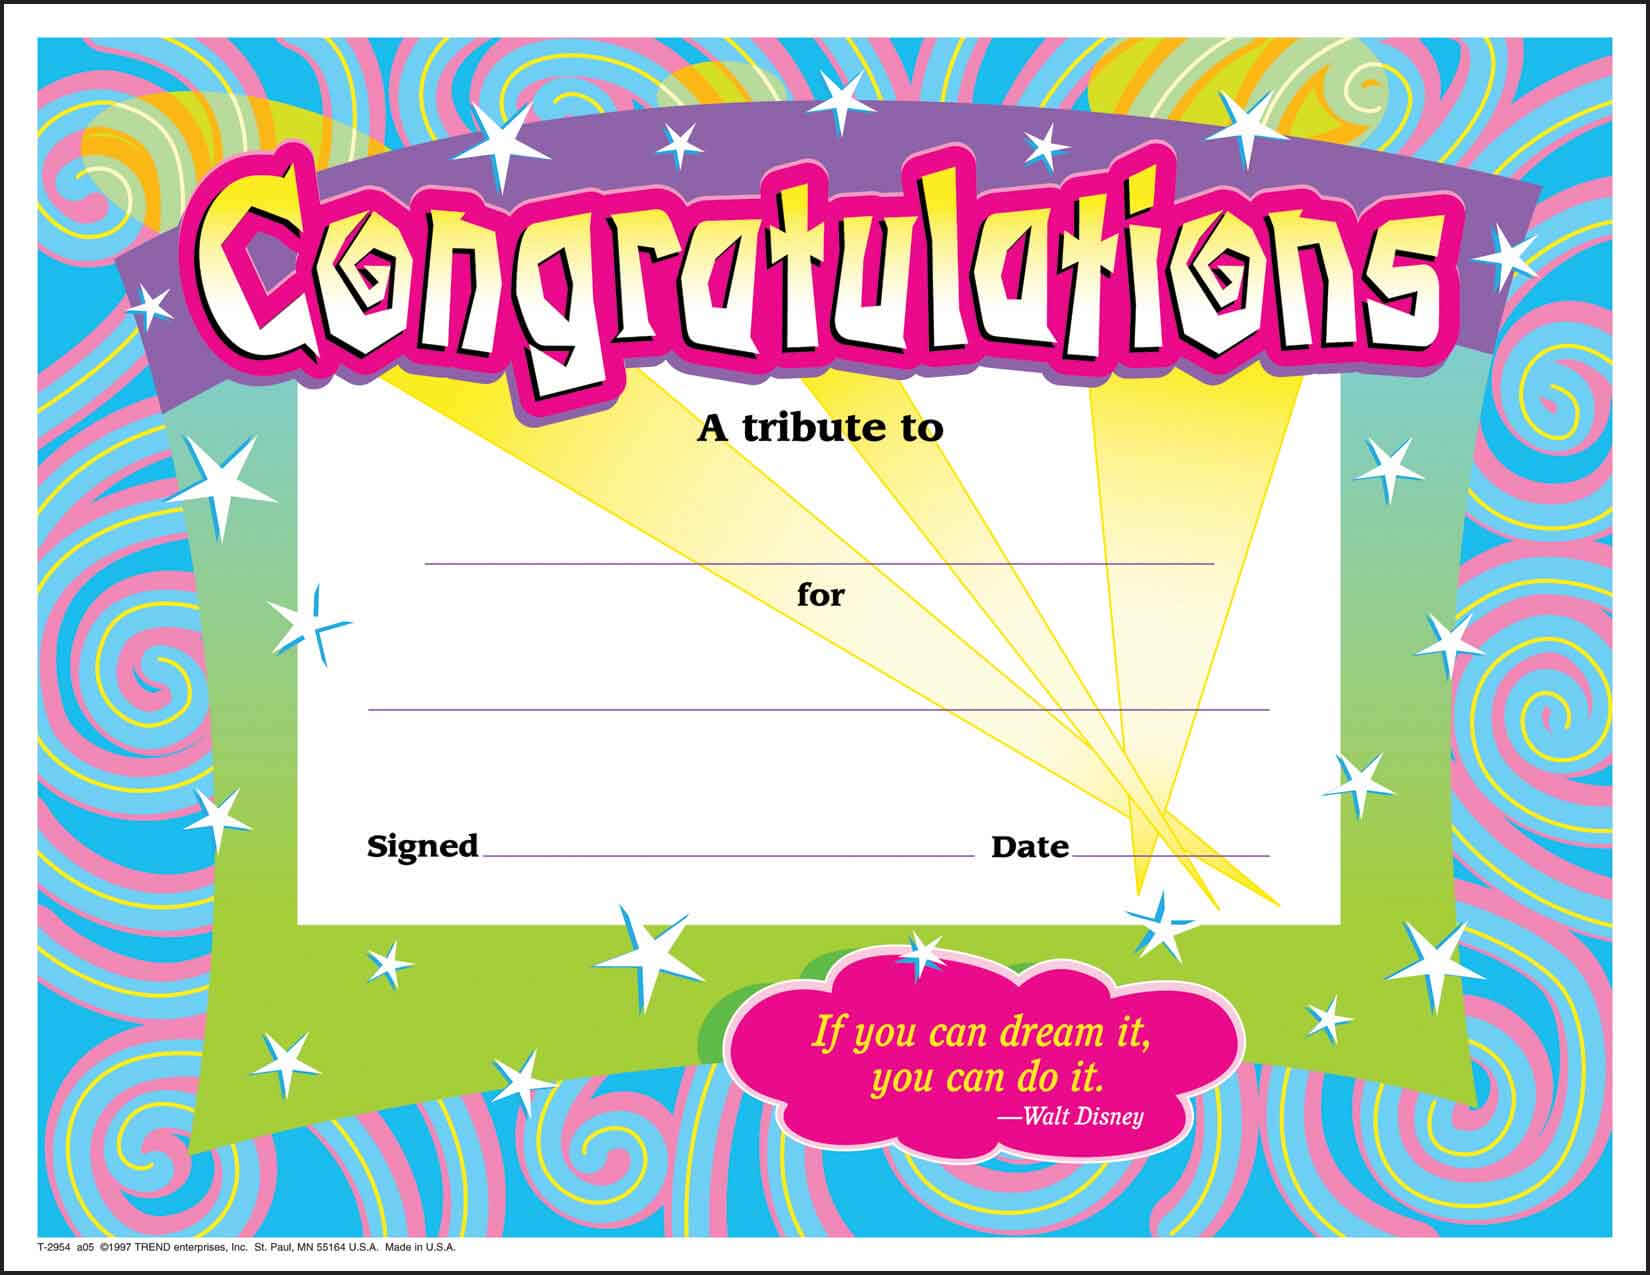 30 Congratulations Awards (Large) Swirl Certificate Pack Regarding Free Funny Certificate Templates For Word